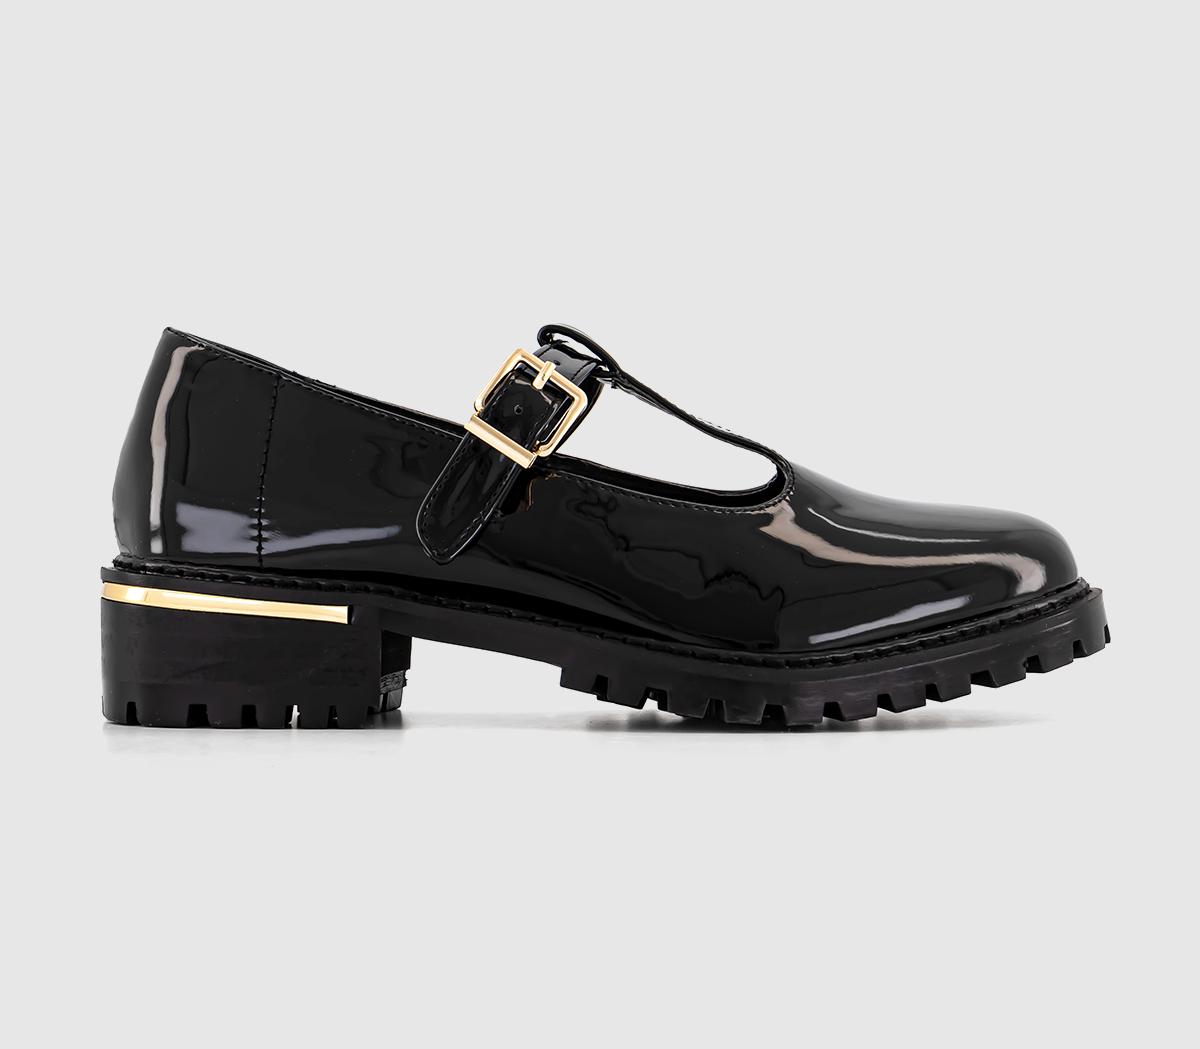 OFFICEFern Cleated Sole Mary JaneBlack Patent